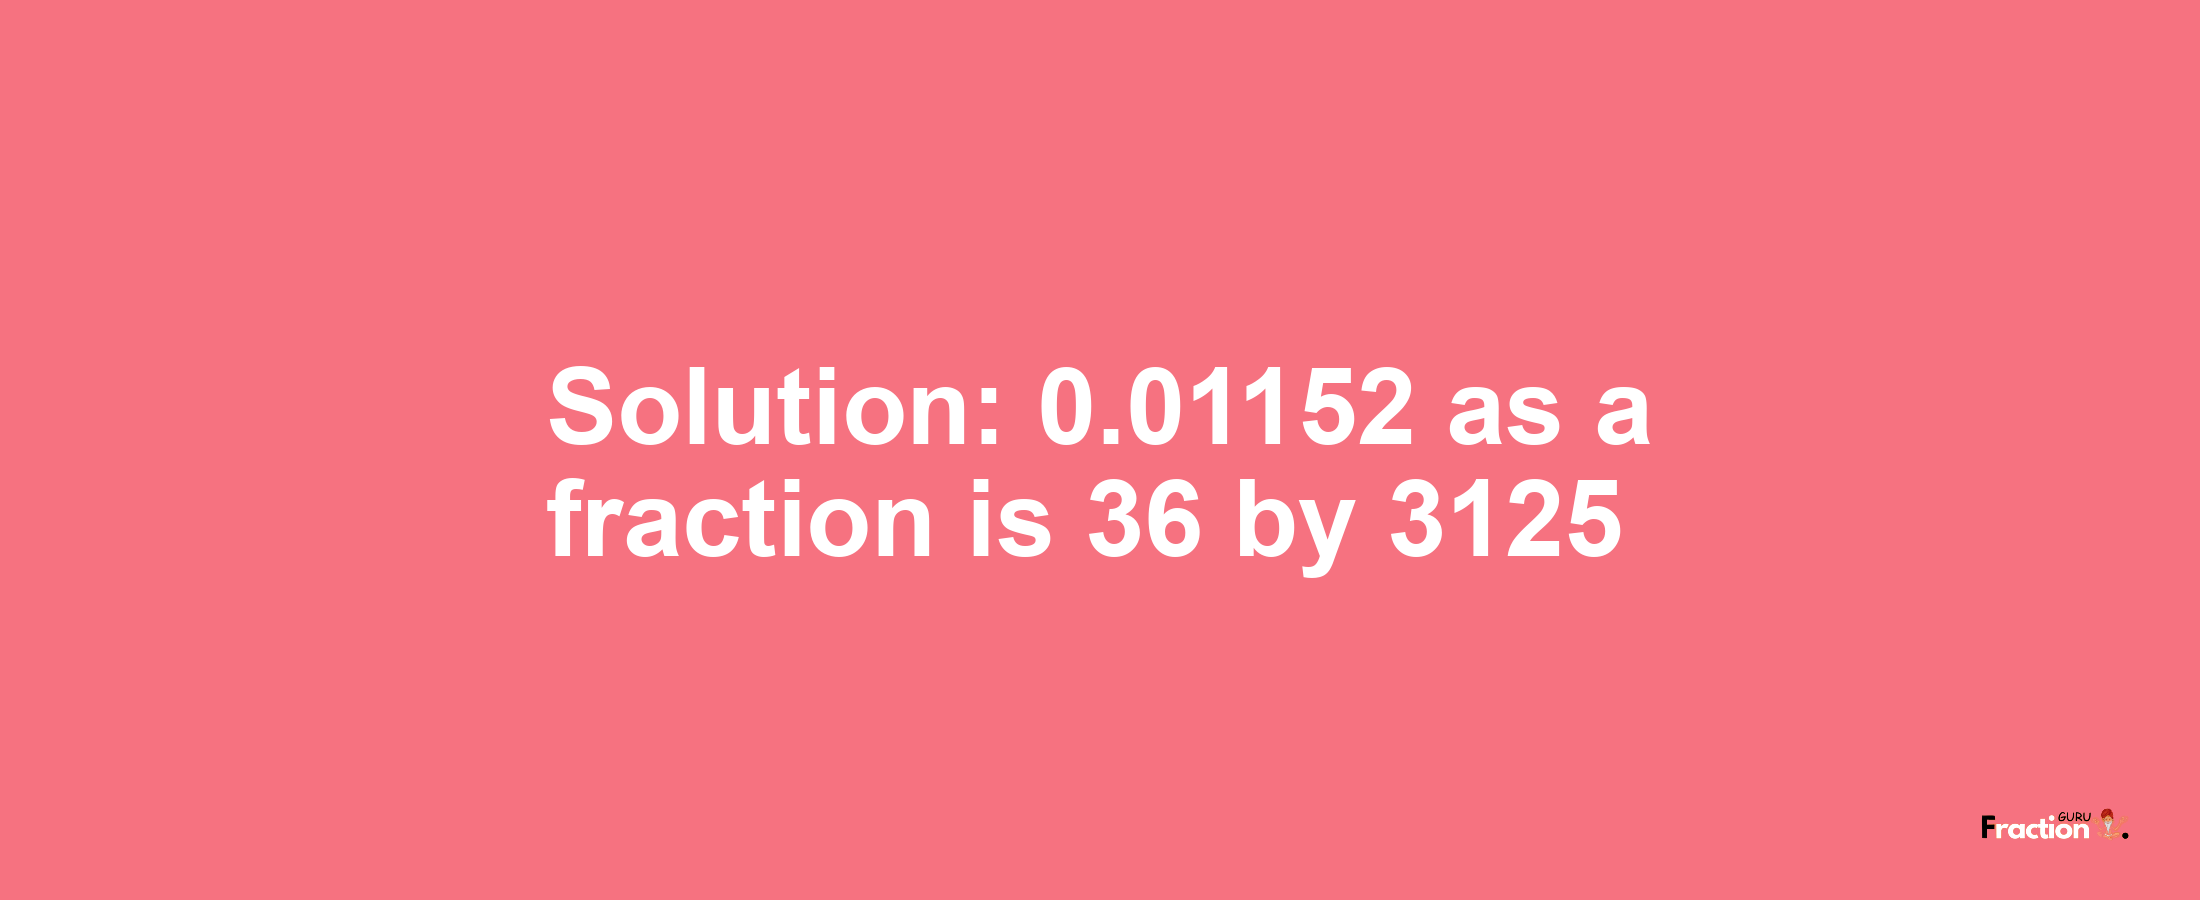 Solution:0.01152 as a fraction is 36/3125